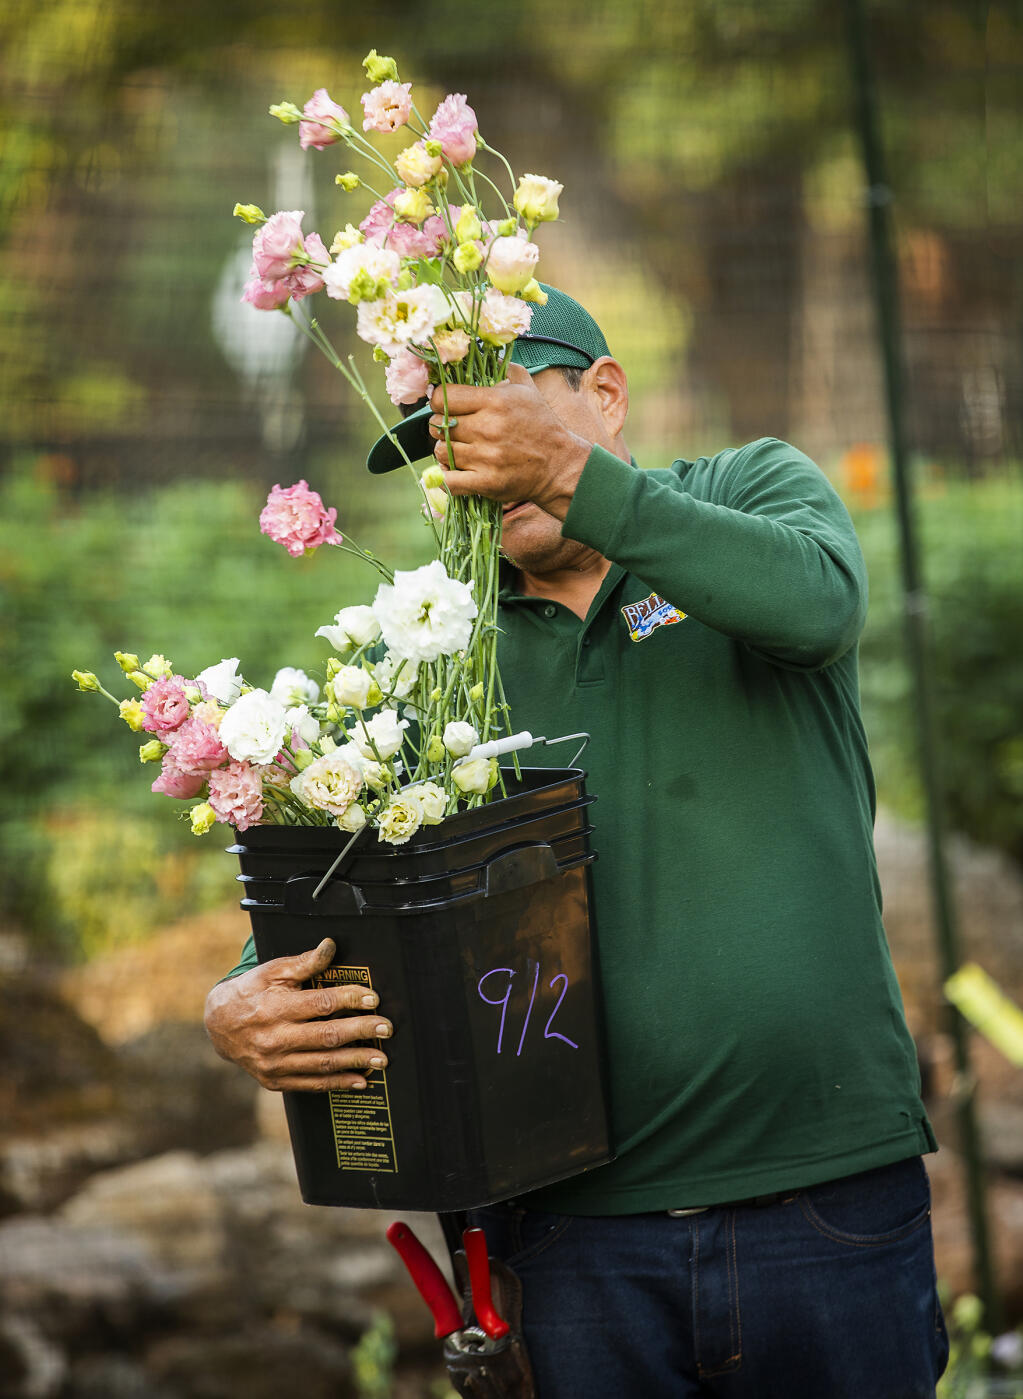 Marcos Mendoza fills a bucket with fresh flowers at the Bell Haven Flower Farm in Kelseyville on Thursday, Sept. 2, 2021. (John Burgess/The Press Democrat)